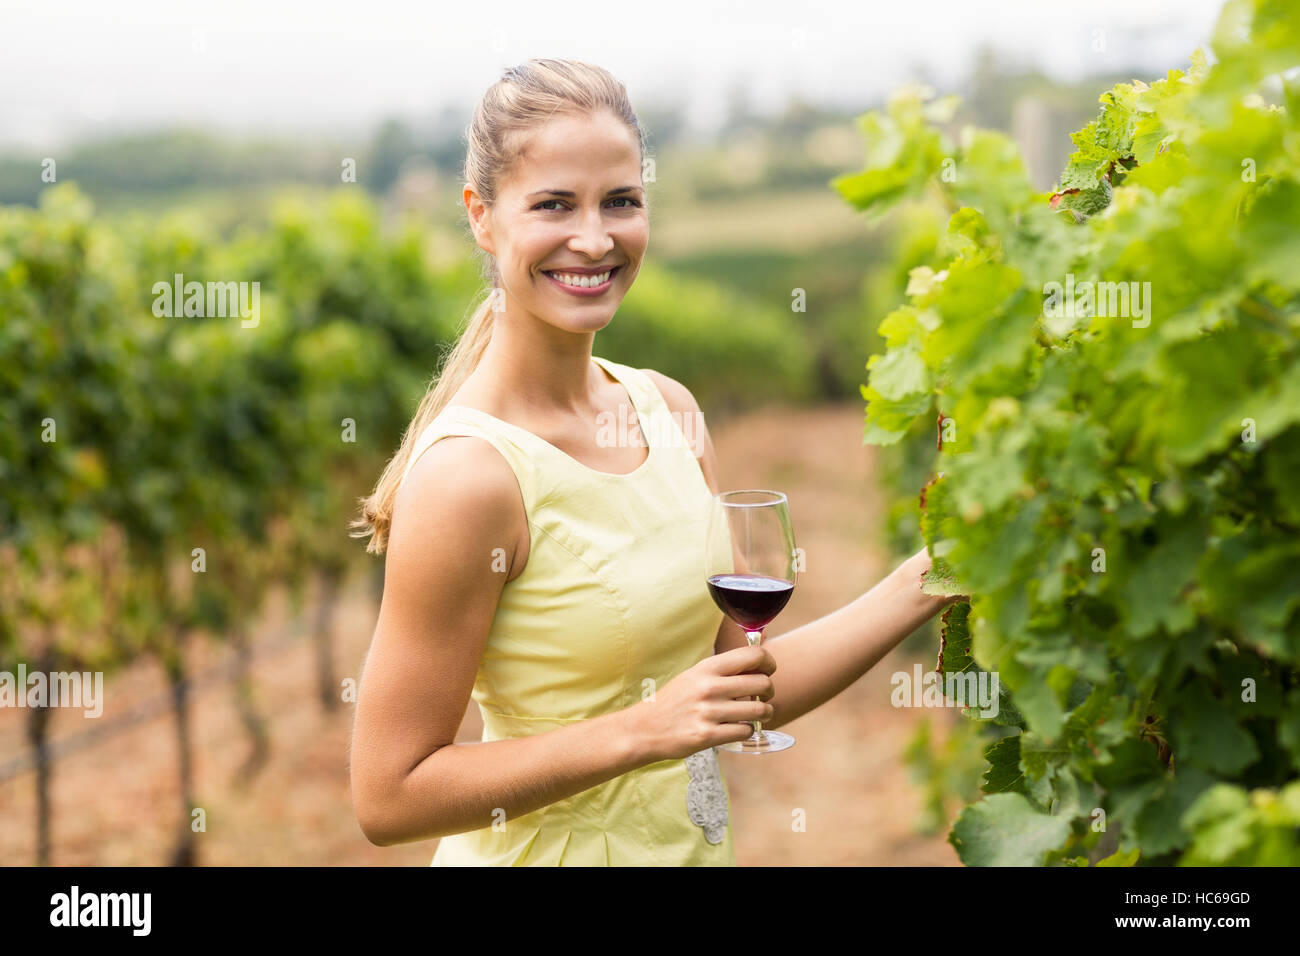 Portrait of female vintner holding wine glass and inspecting grape crop Stock Photo